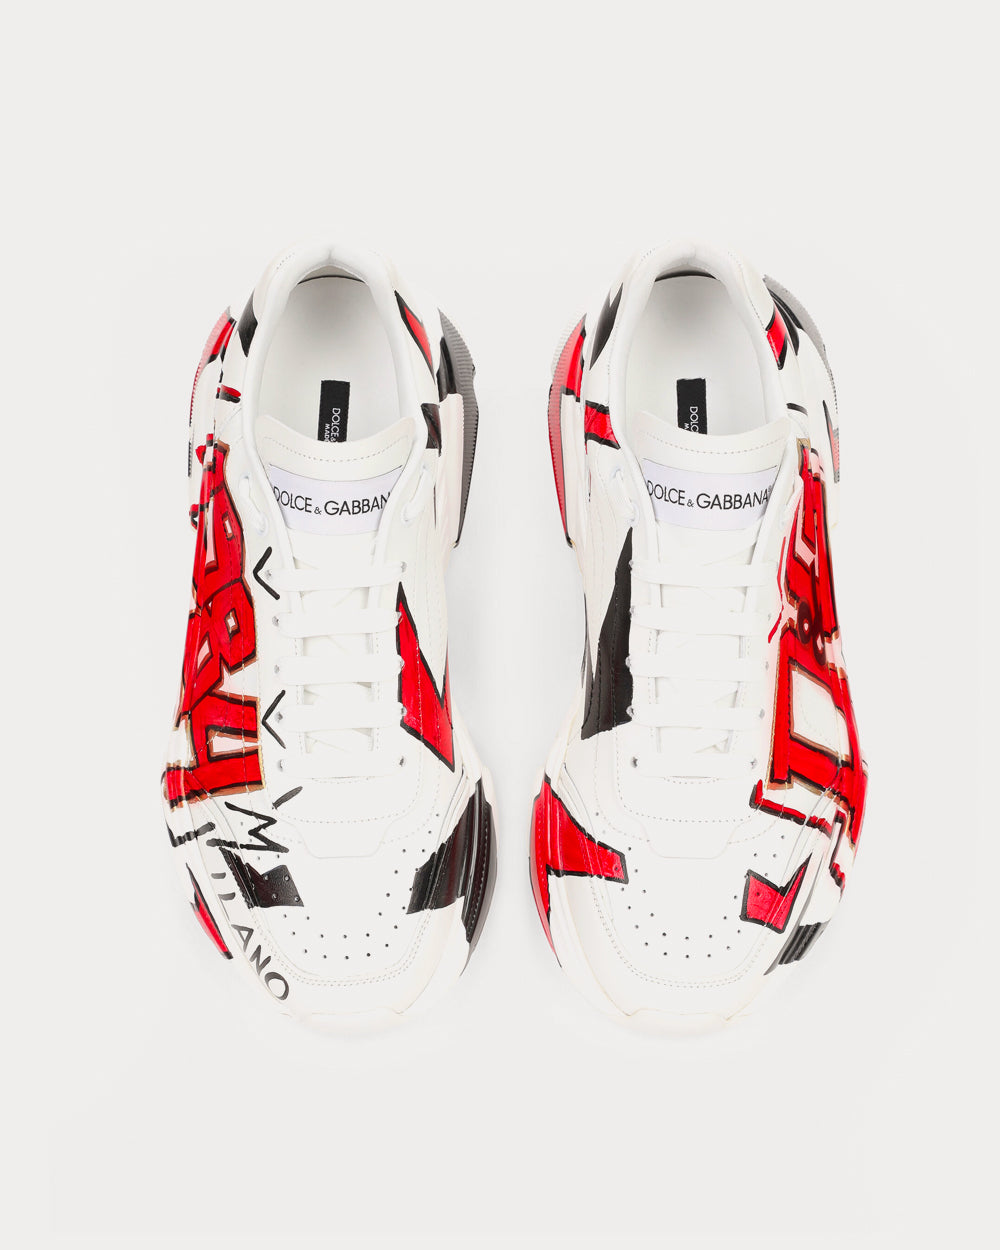 Dolce & Gabbana - Hand-painted Calfskin Nappa Daymaster White Low Top Sneakers